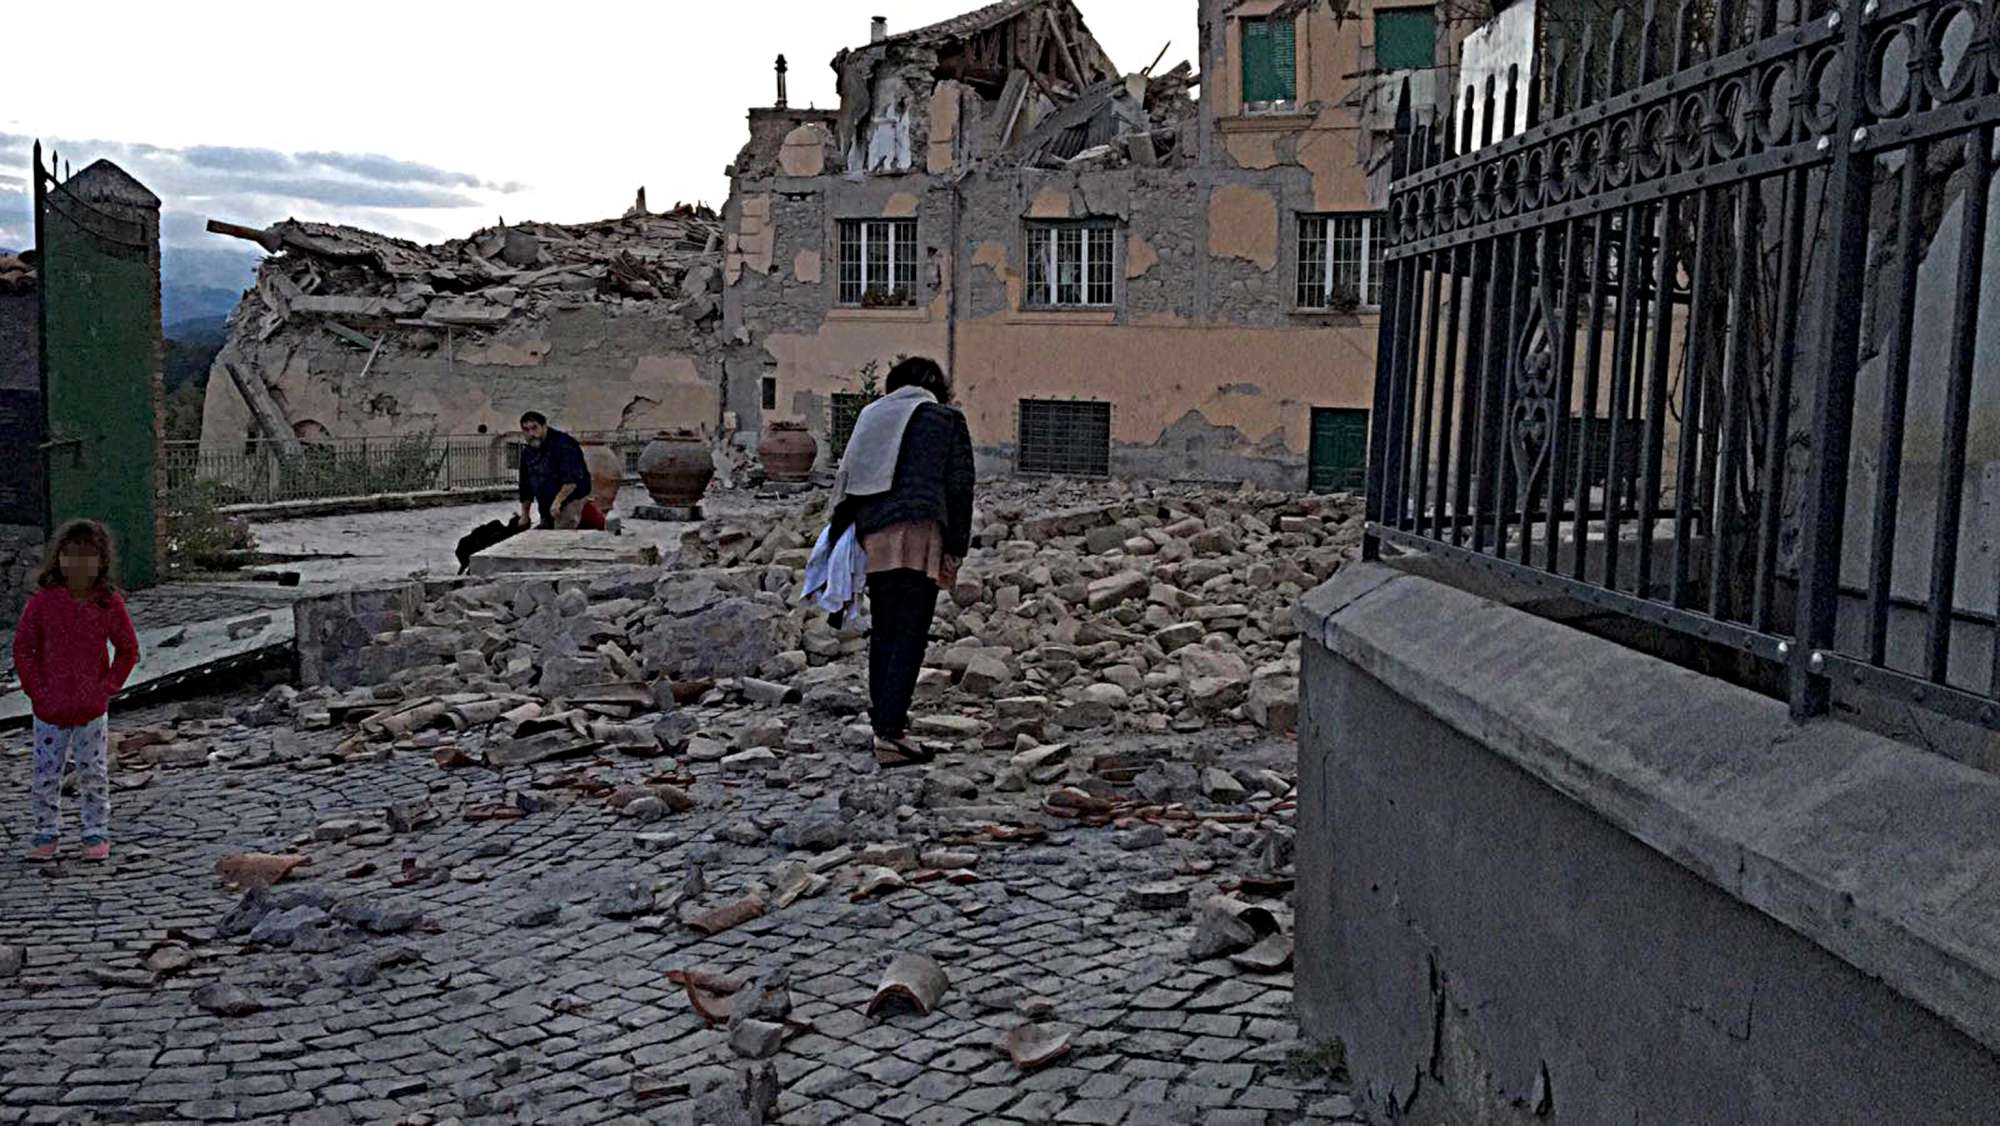 The town of Amatrice, mostly destroyed by the quake that hit Central Italy. Amatrice, Italy, 24 august 2016. ANSA/EMILIANO GRILLOTTI